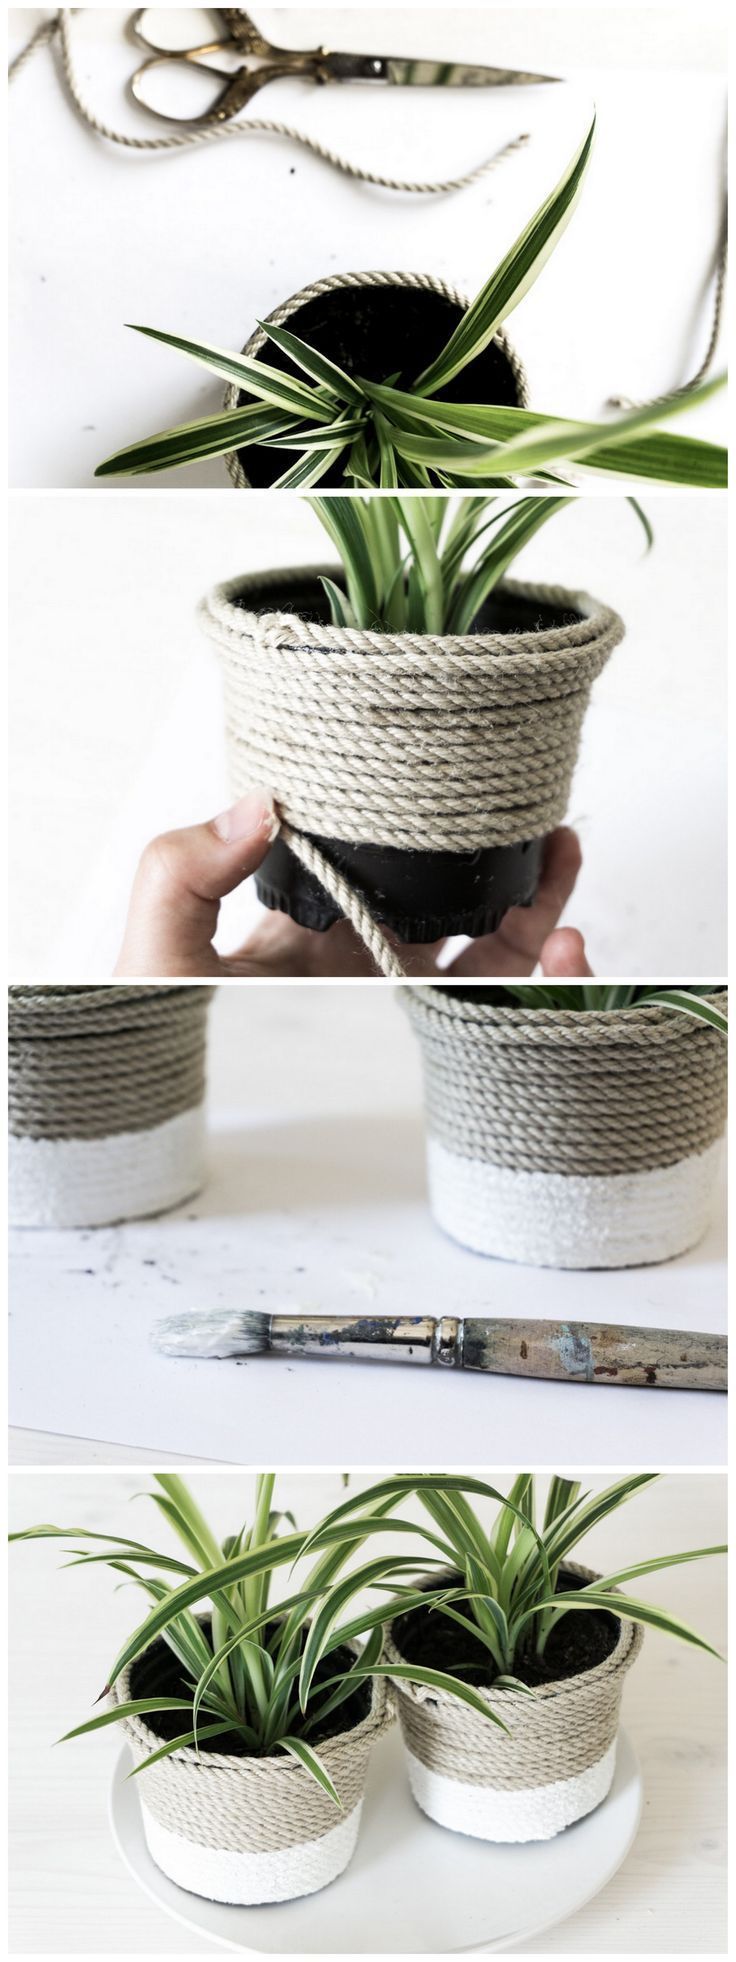 DIY plastic pot upcycling with sisal -   14 plants Potted upcycle ideas